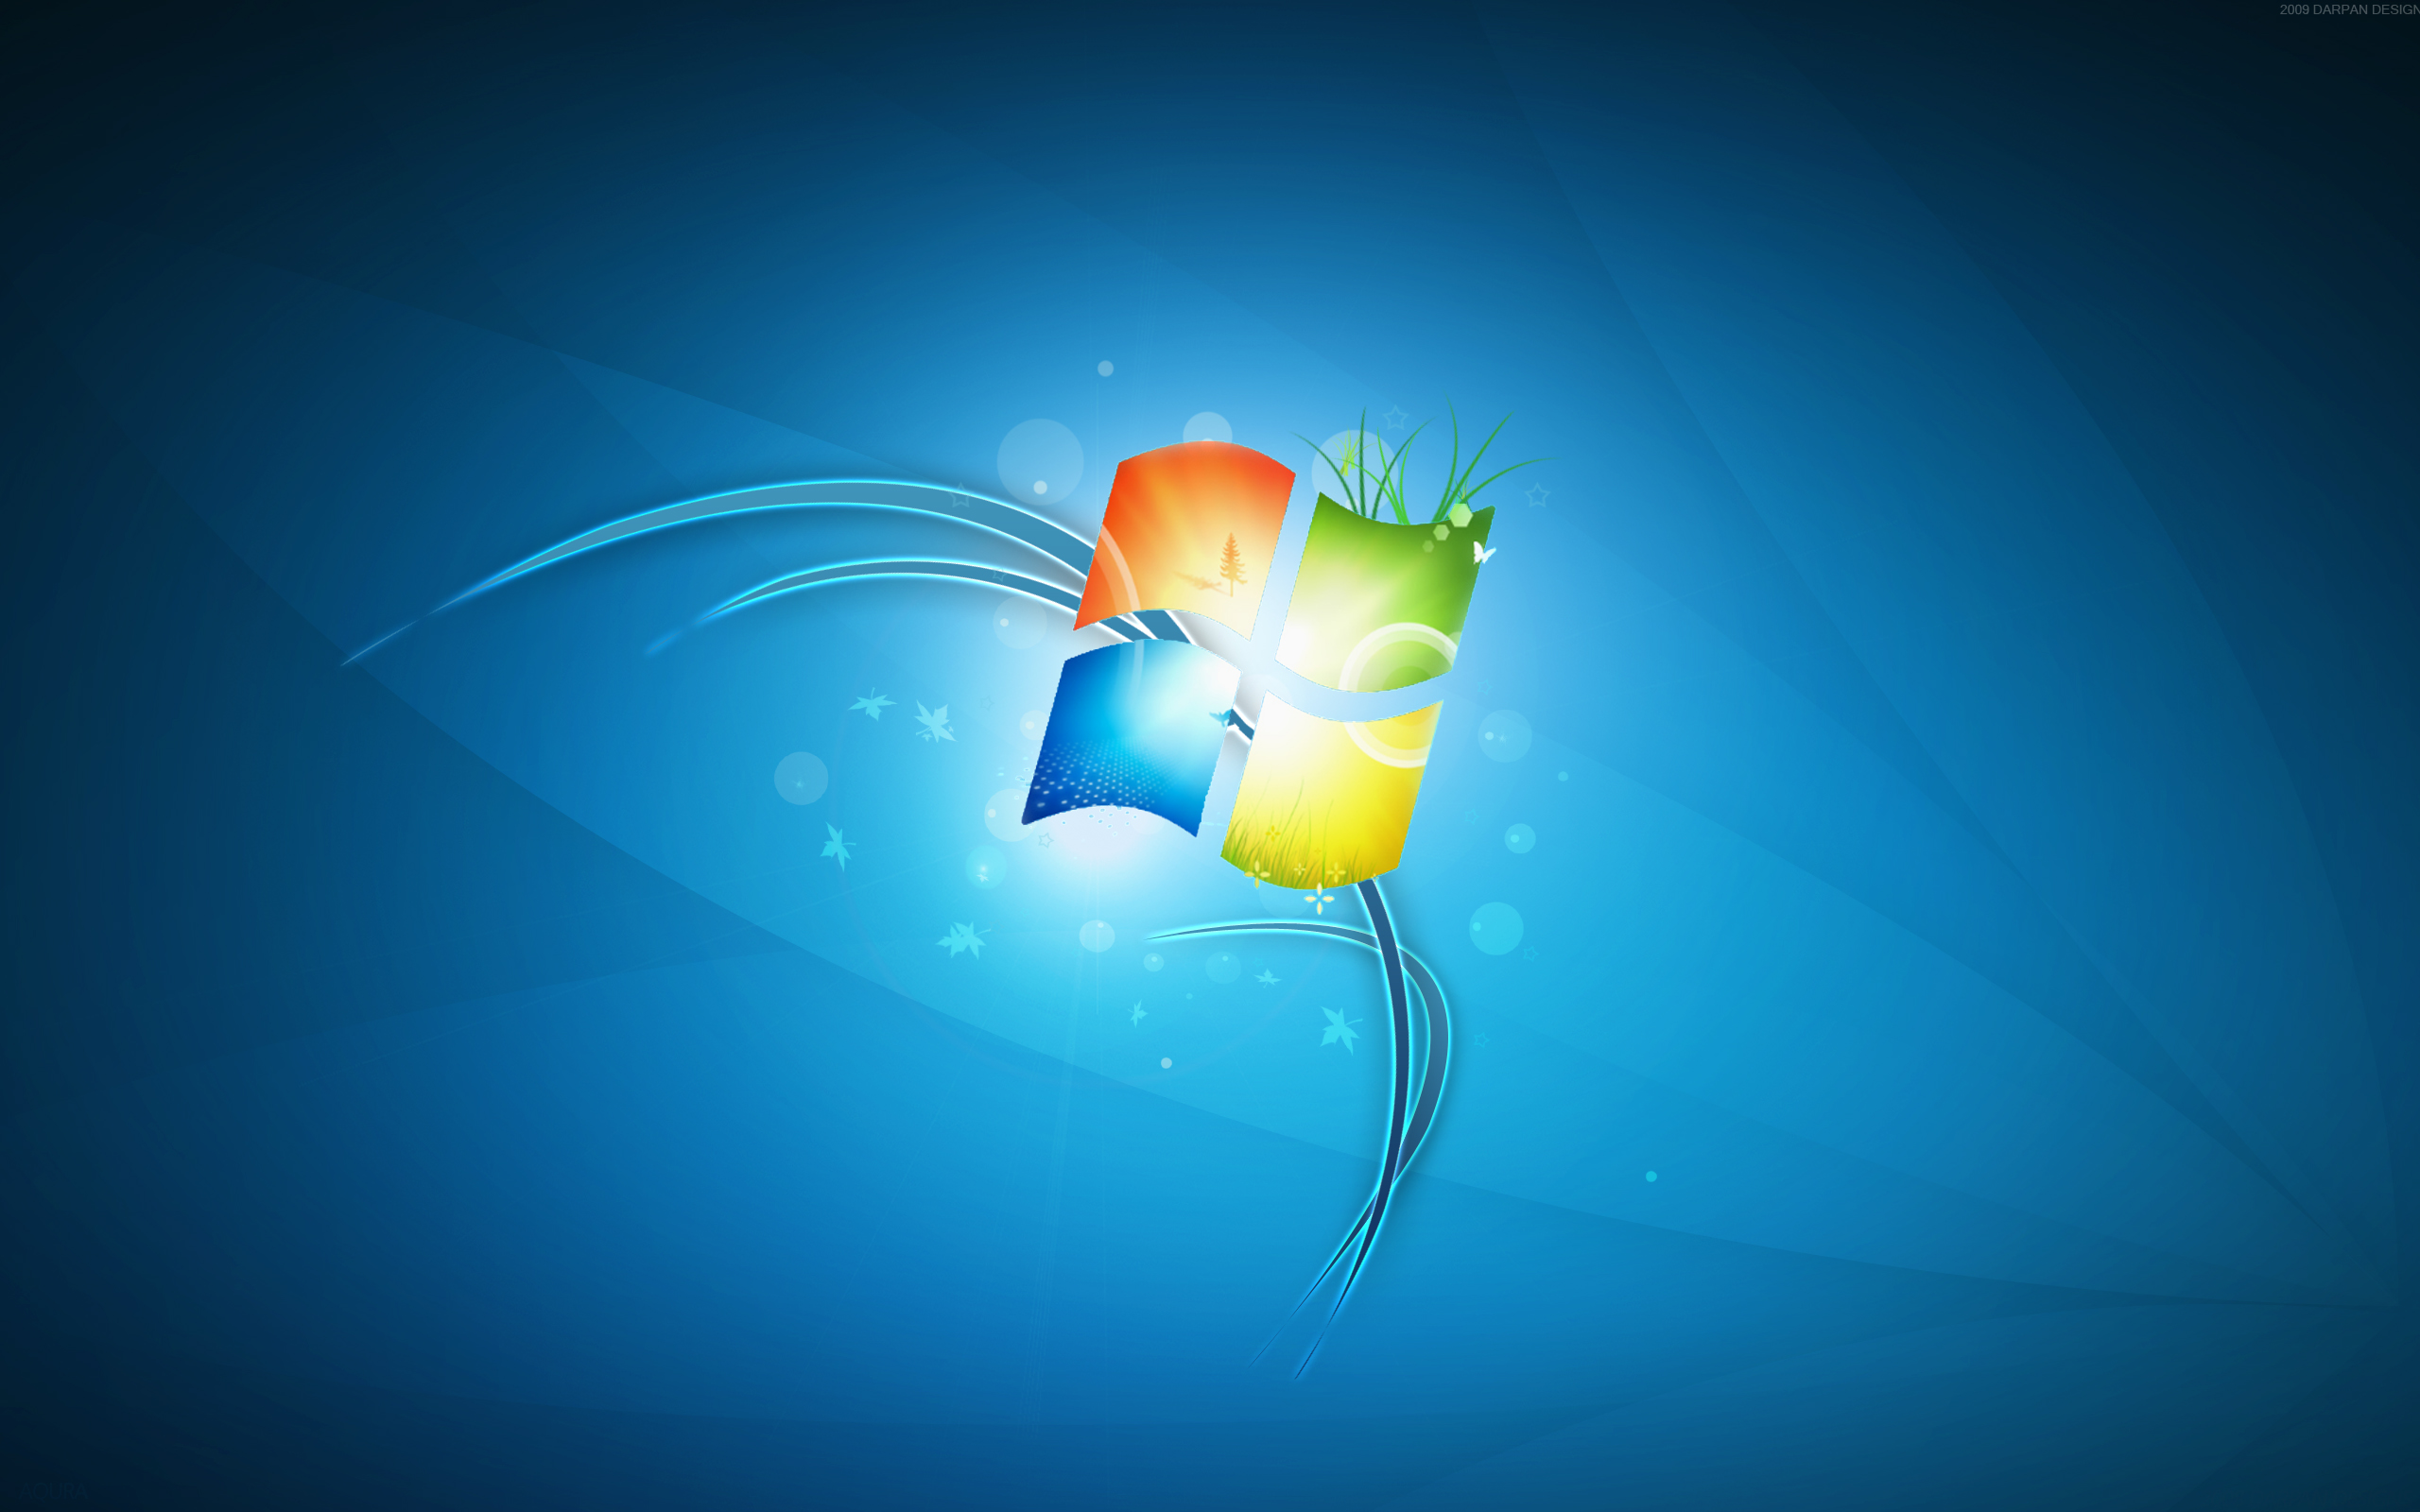 Windows 7 ultimate wallpapers free download